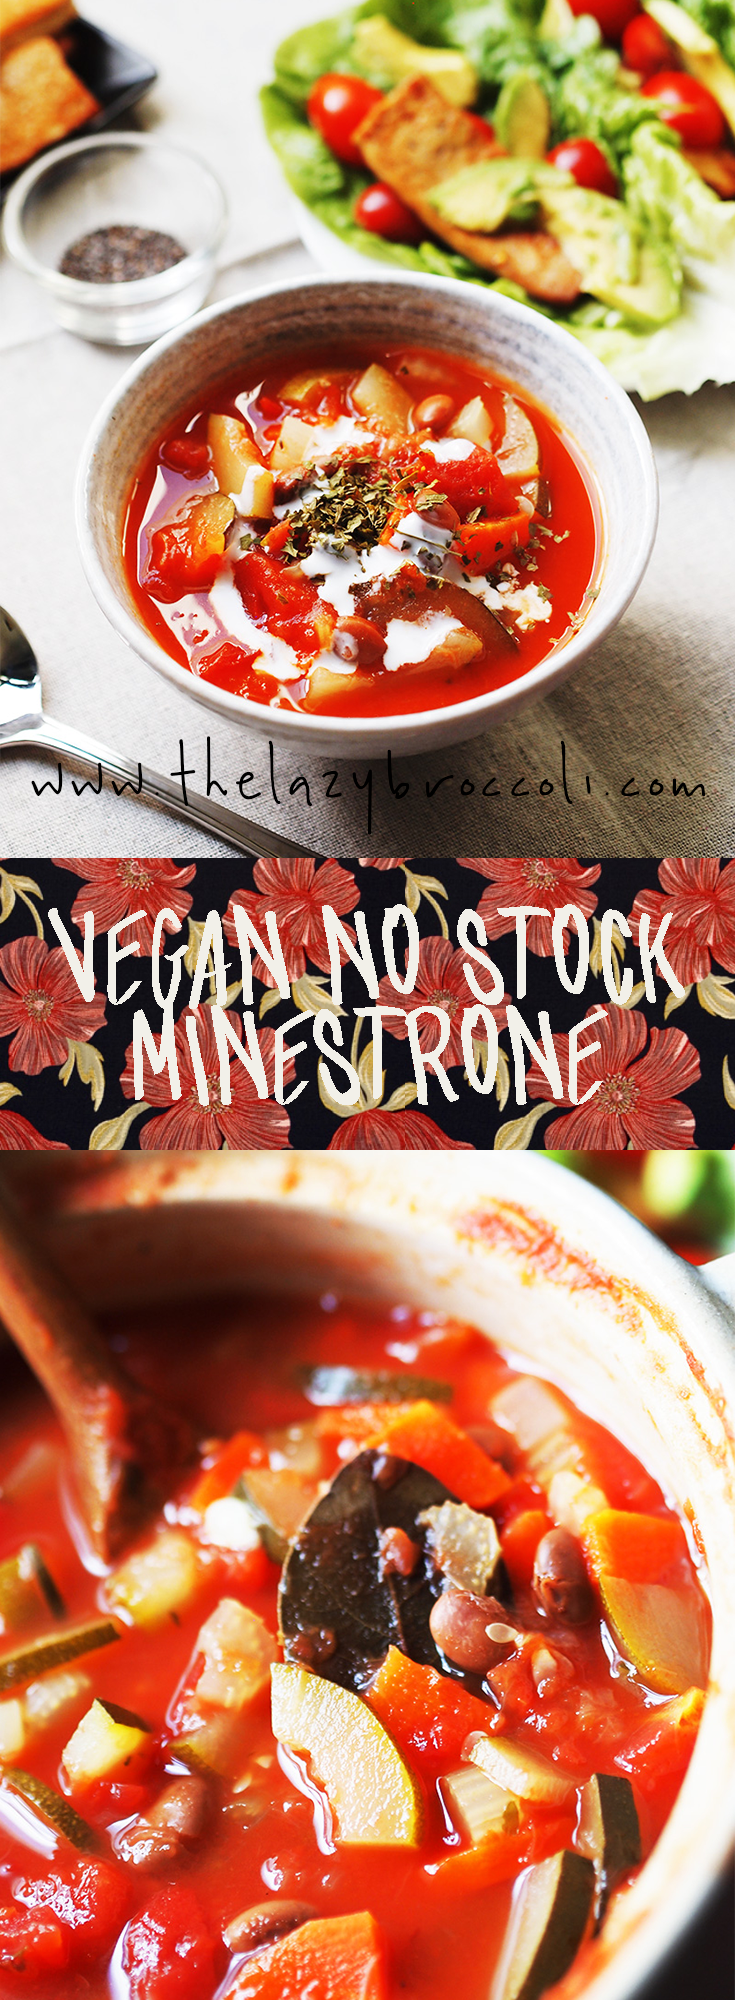 this vegan no stock minestrone is so easy and delicious! #vegan #nostock #minestrone #lowcarb #glutenfree #noonionnogarlic #vegetarian #thelazybroccoli #soup #recipe